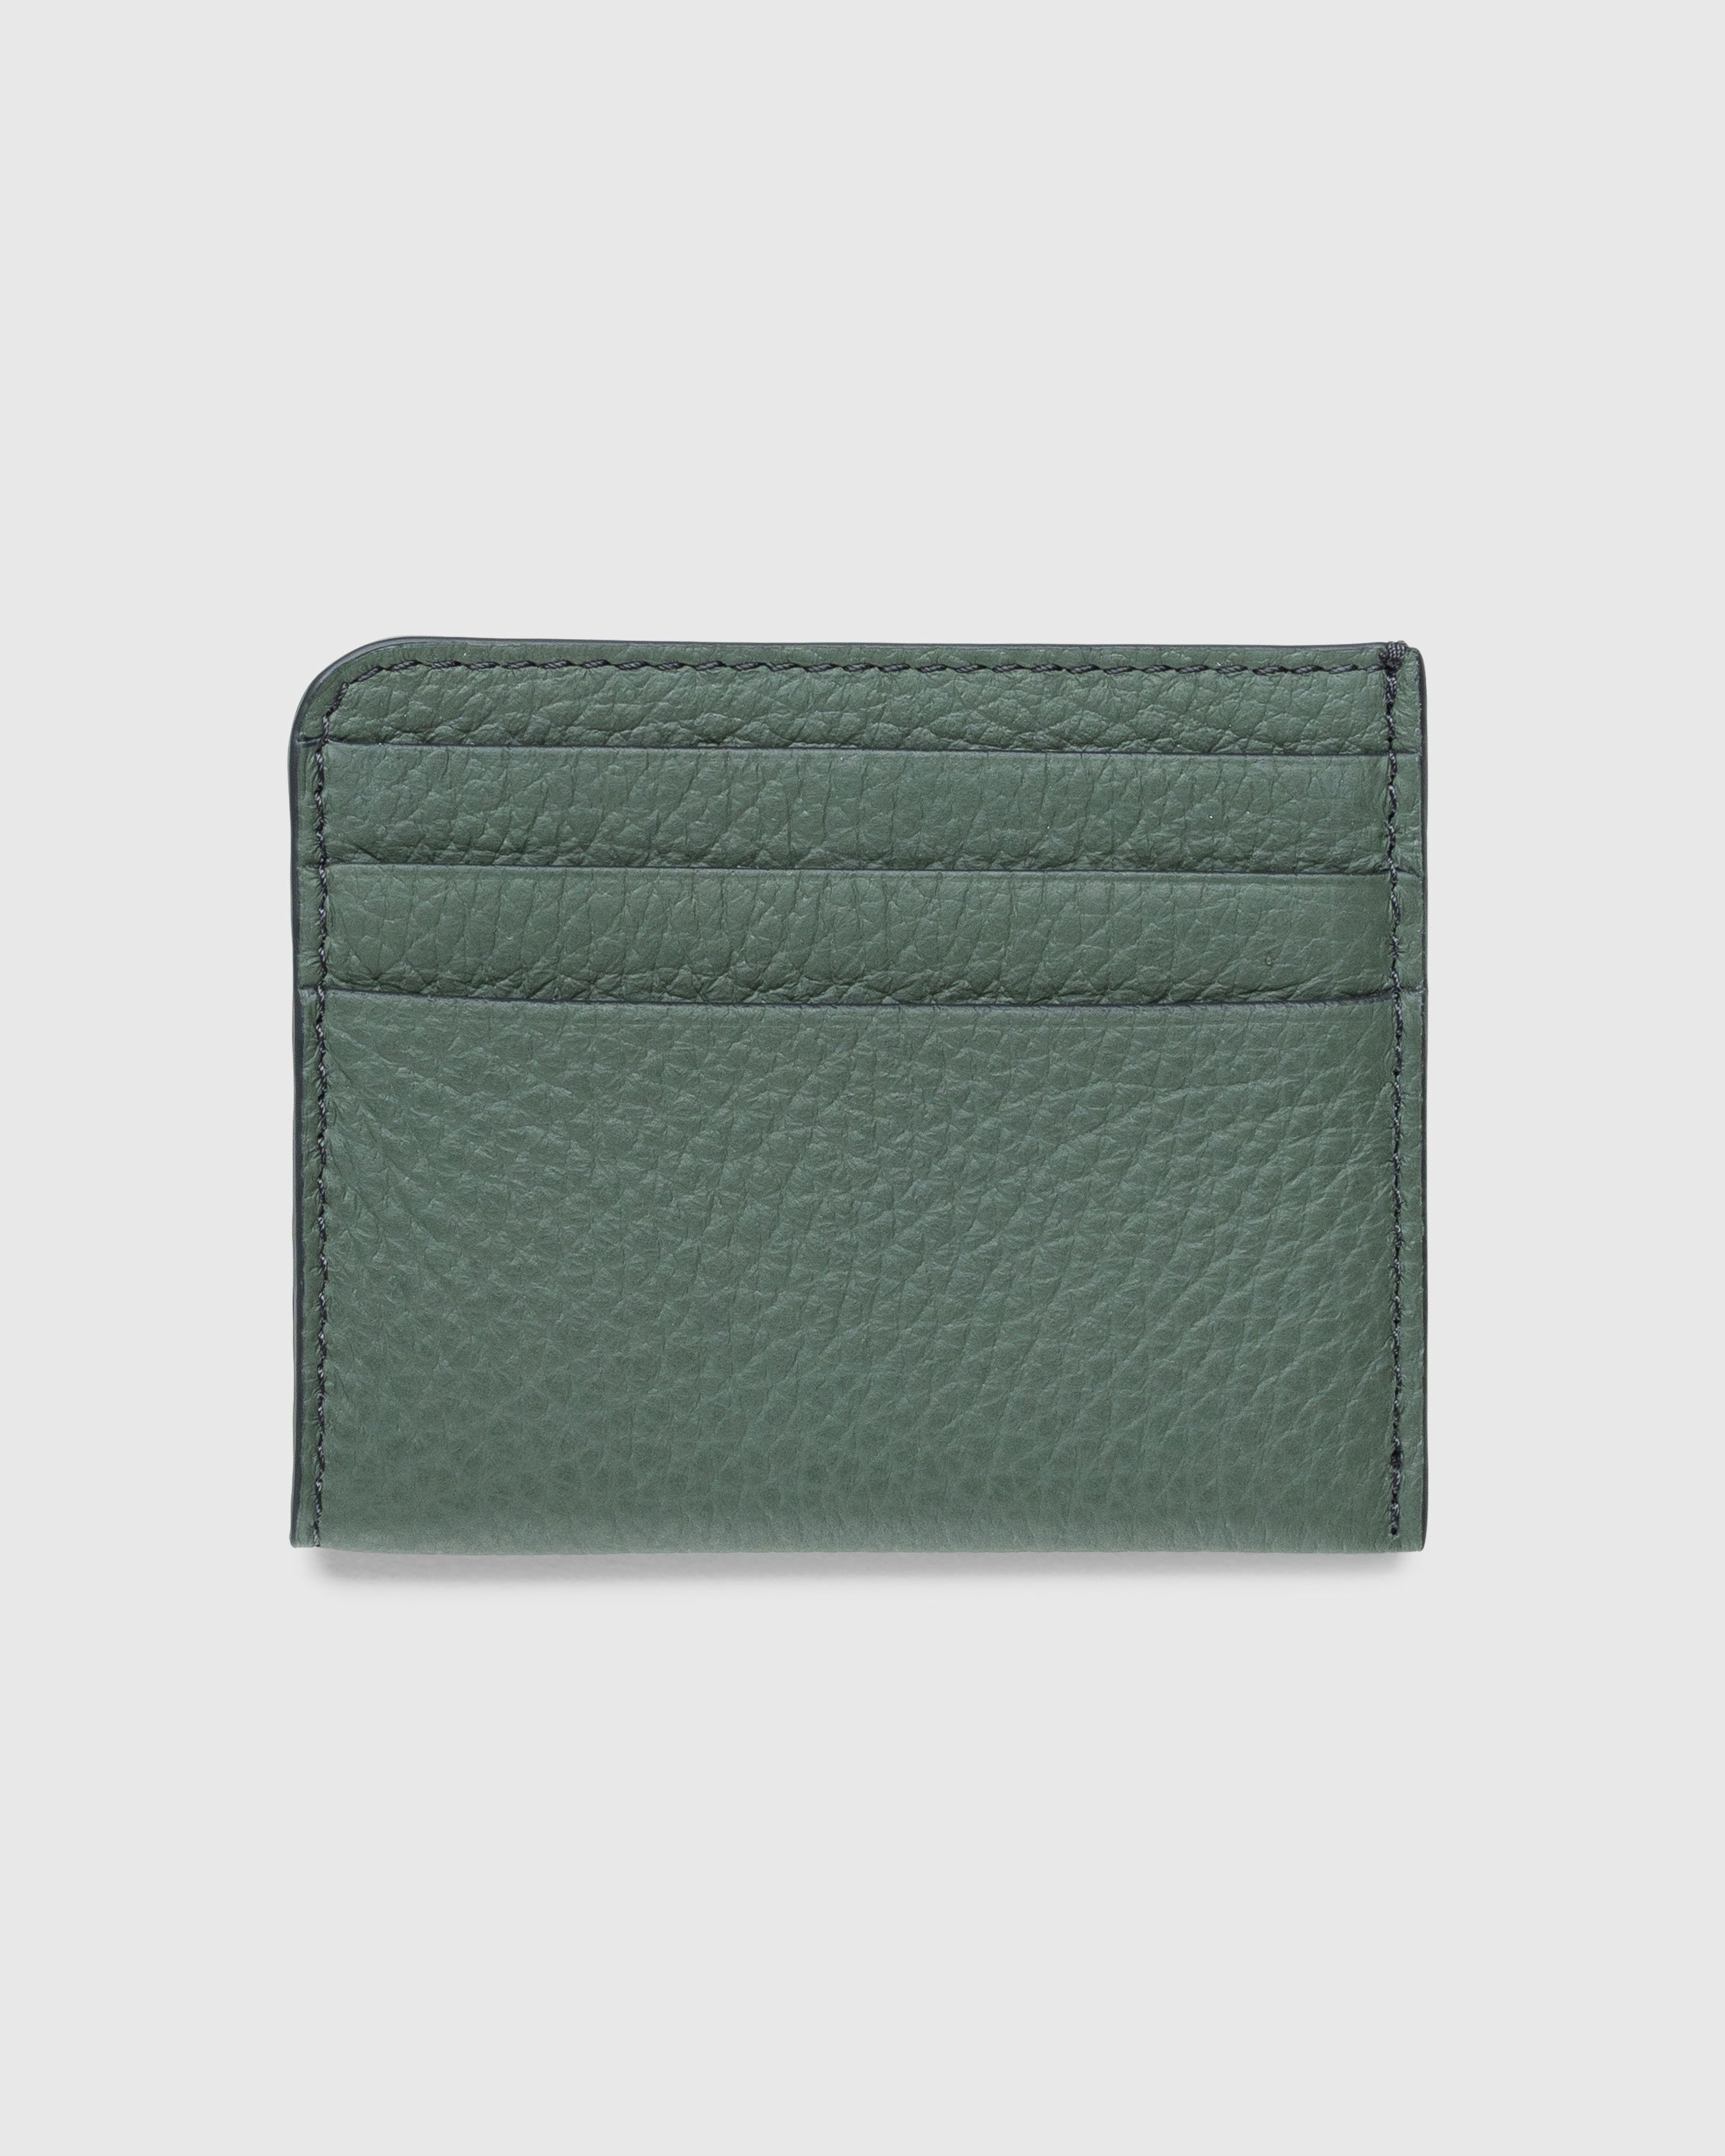 Maison Margiela - Leather Card Holder Thyme - Accessories - Green - Image 2